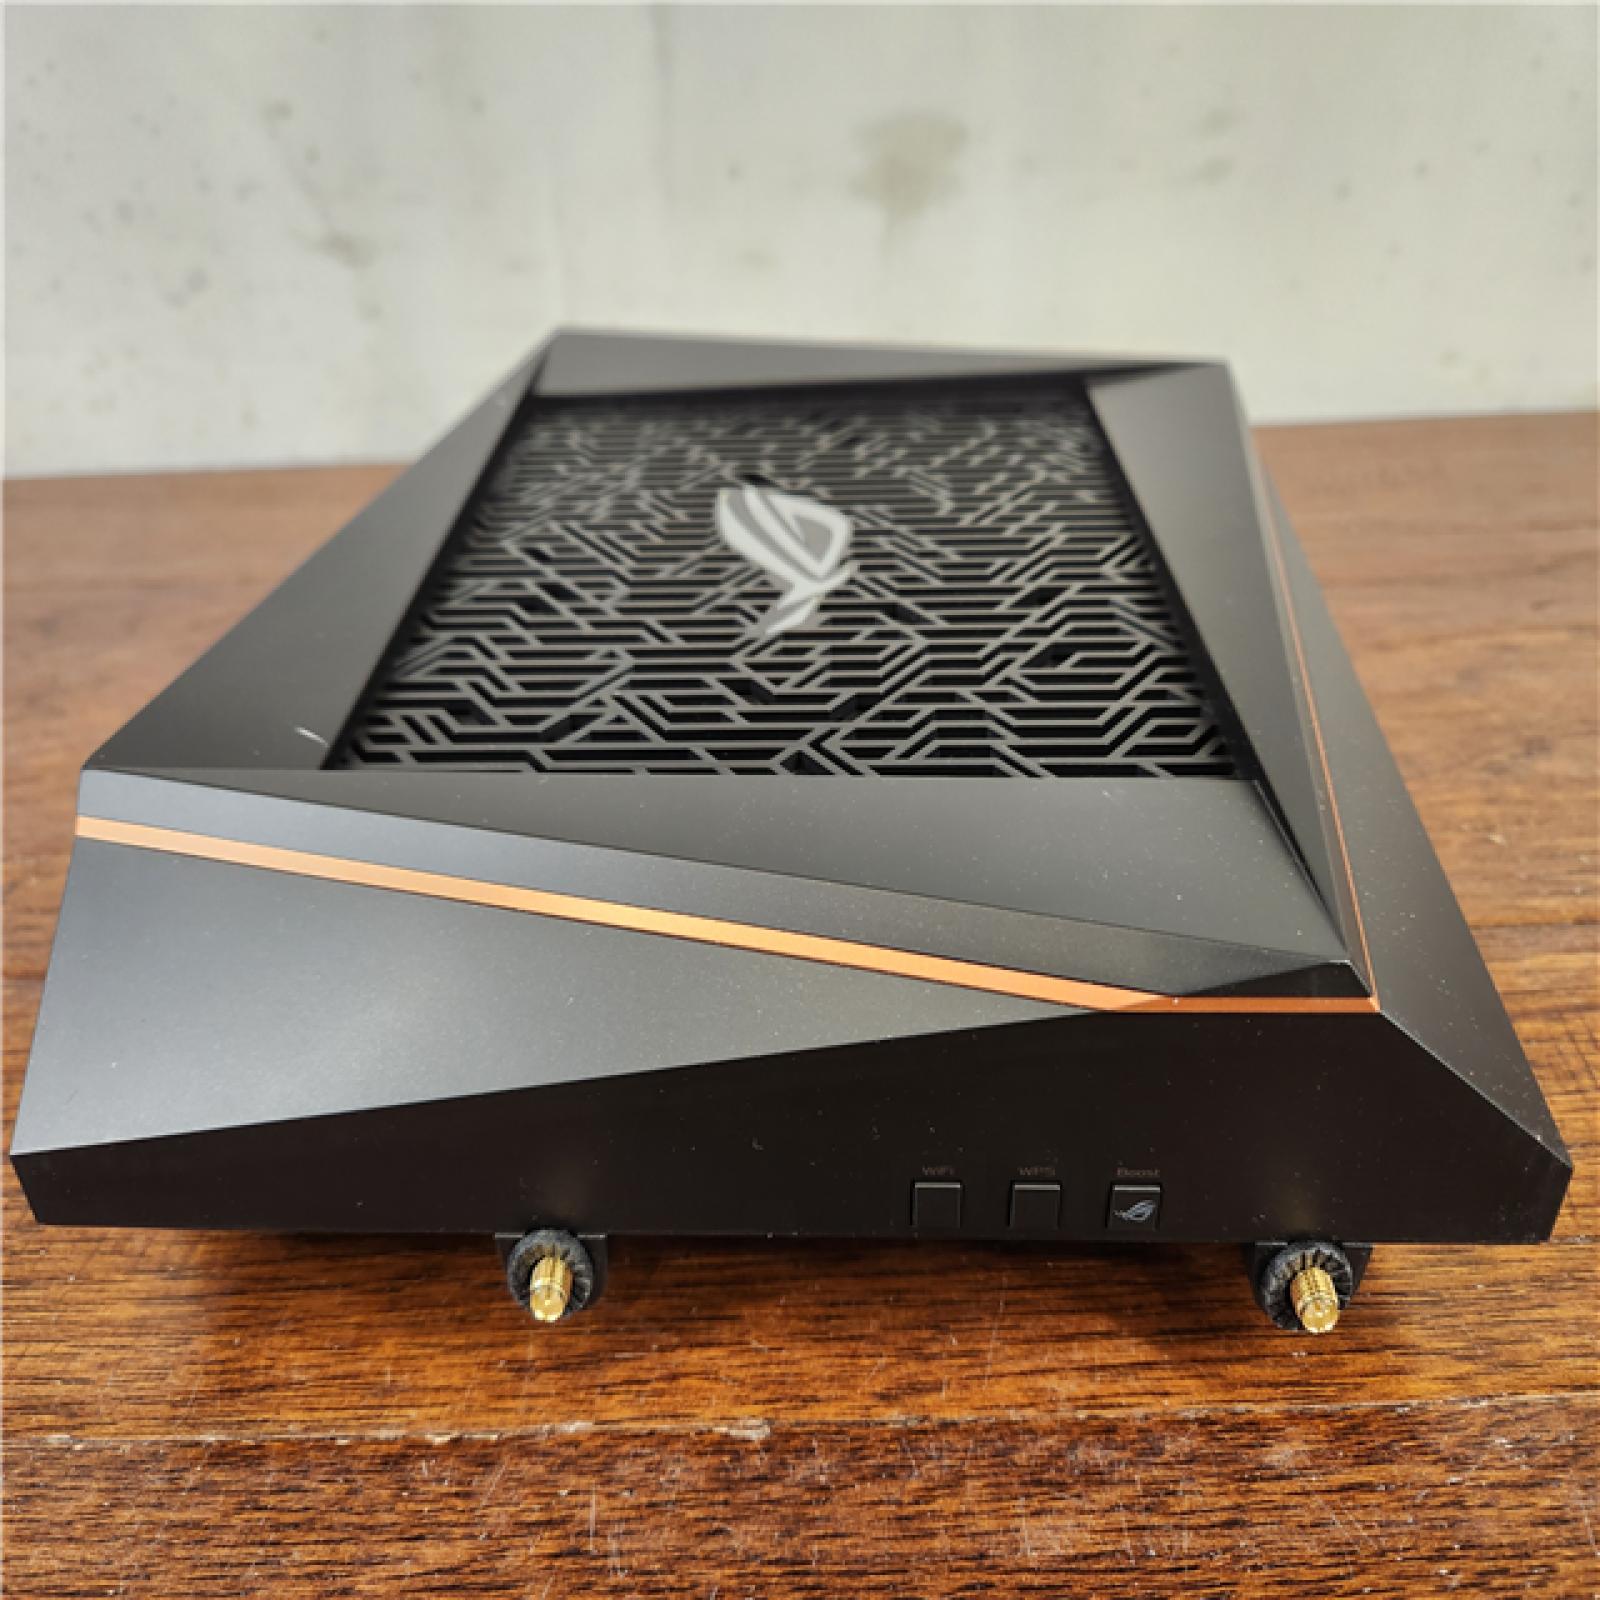 AS-IS ASUS ROG Rapture Tri-band WiFi 6 Gaming Router - Black (GT-AX11000)